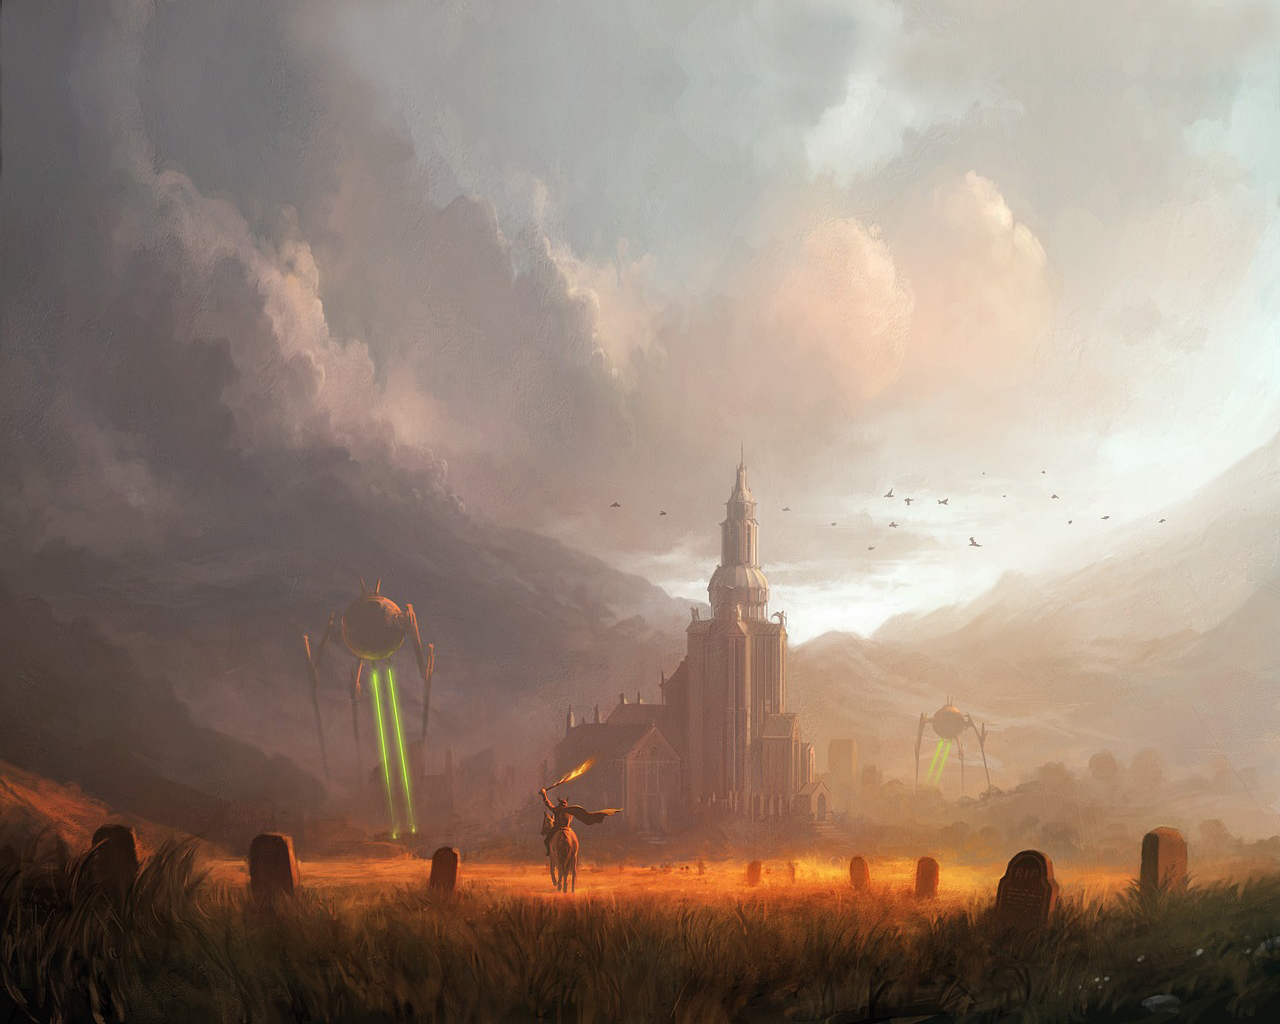 The Zetans Invade by Andreas Rocha